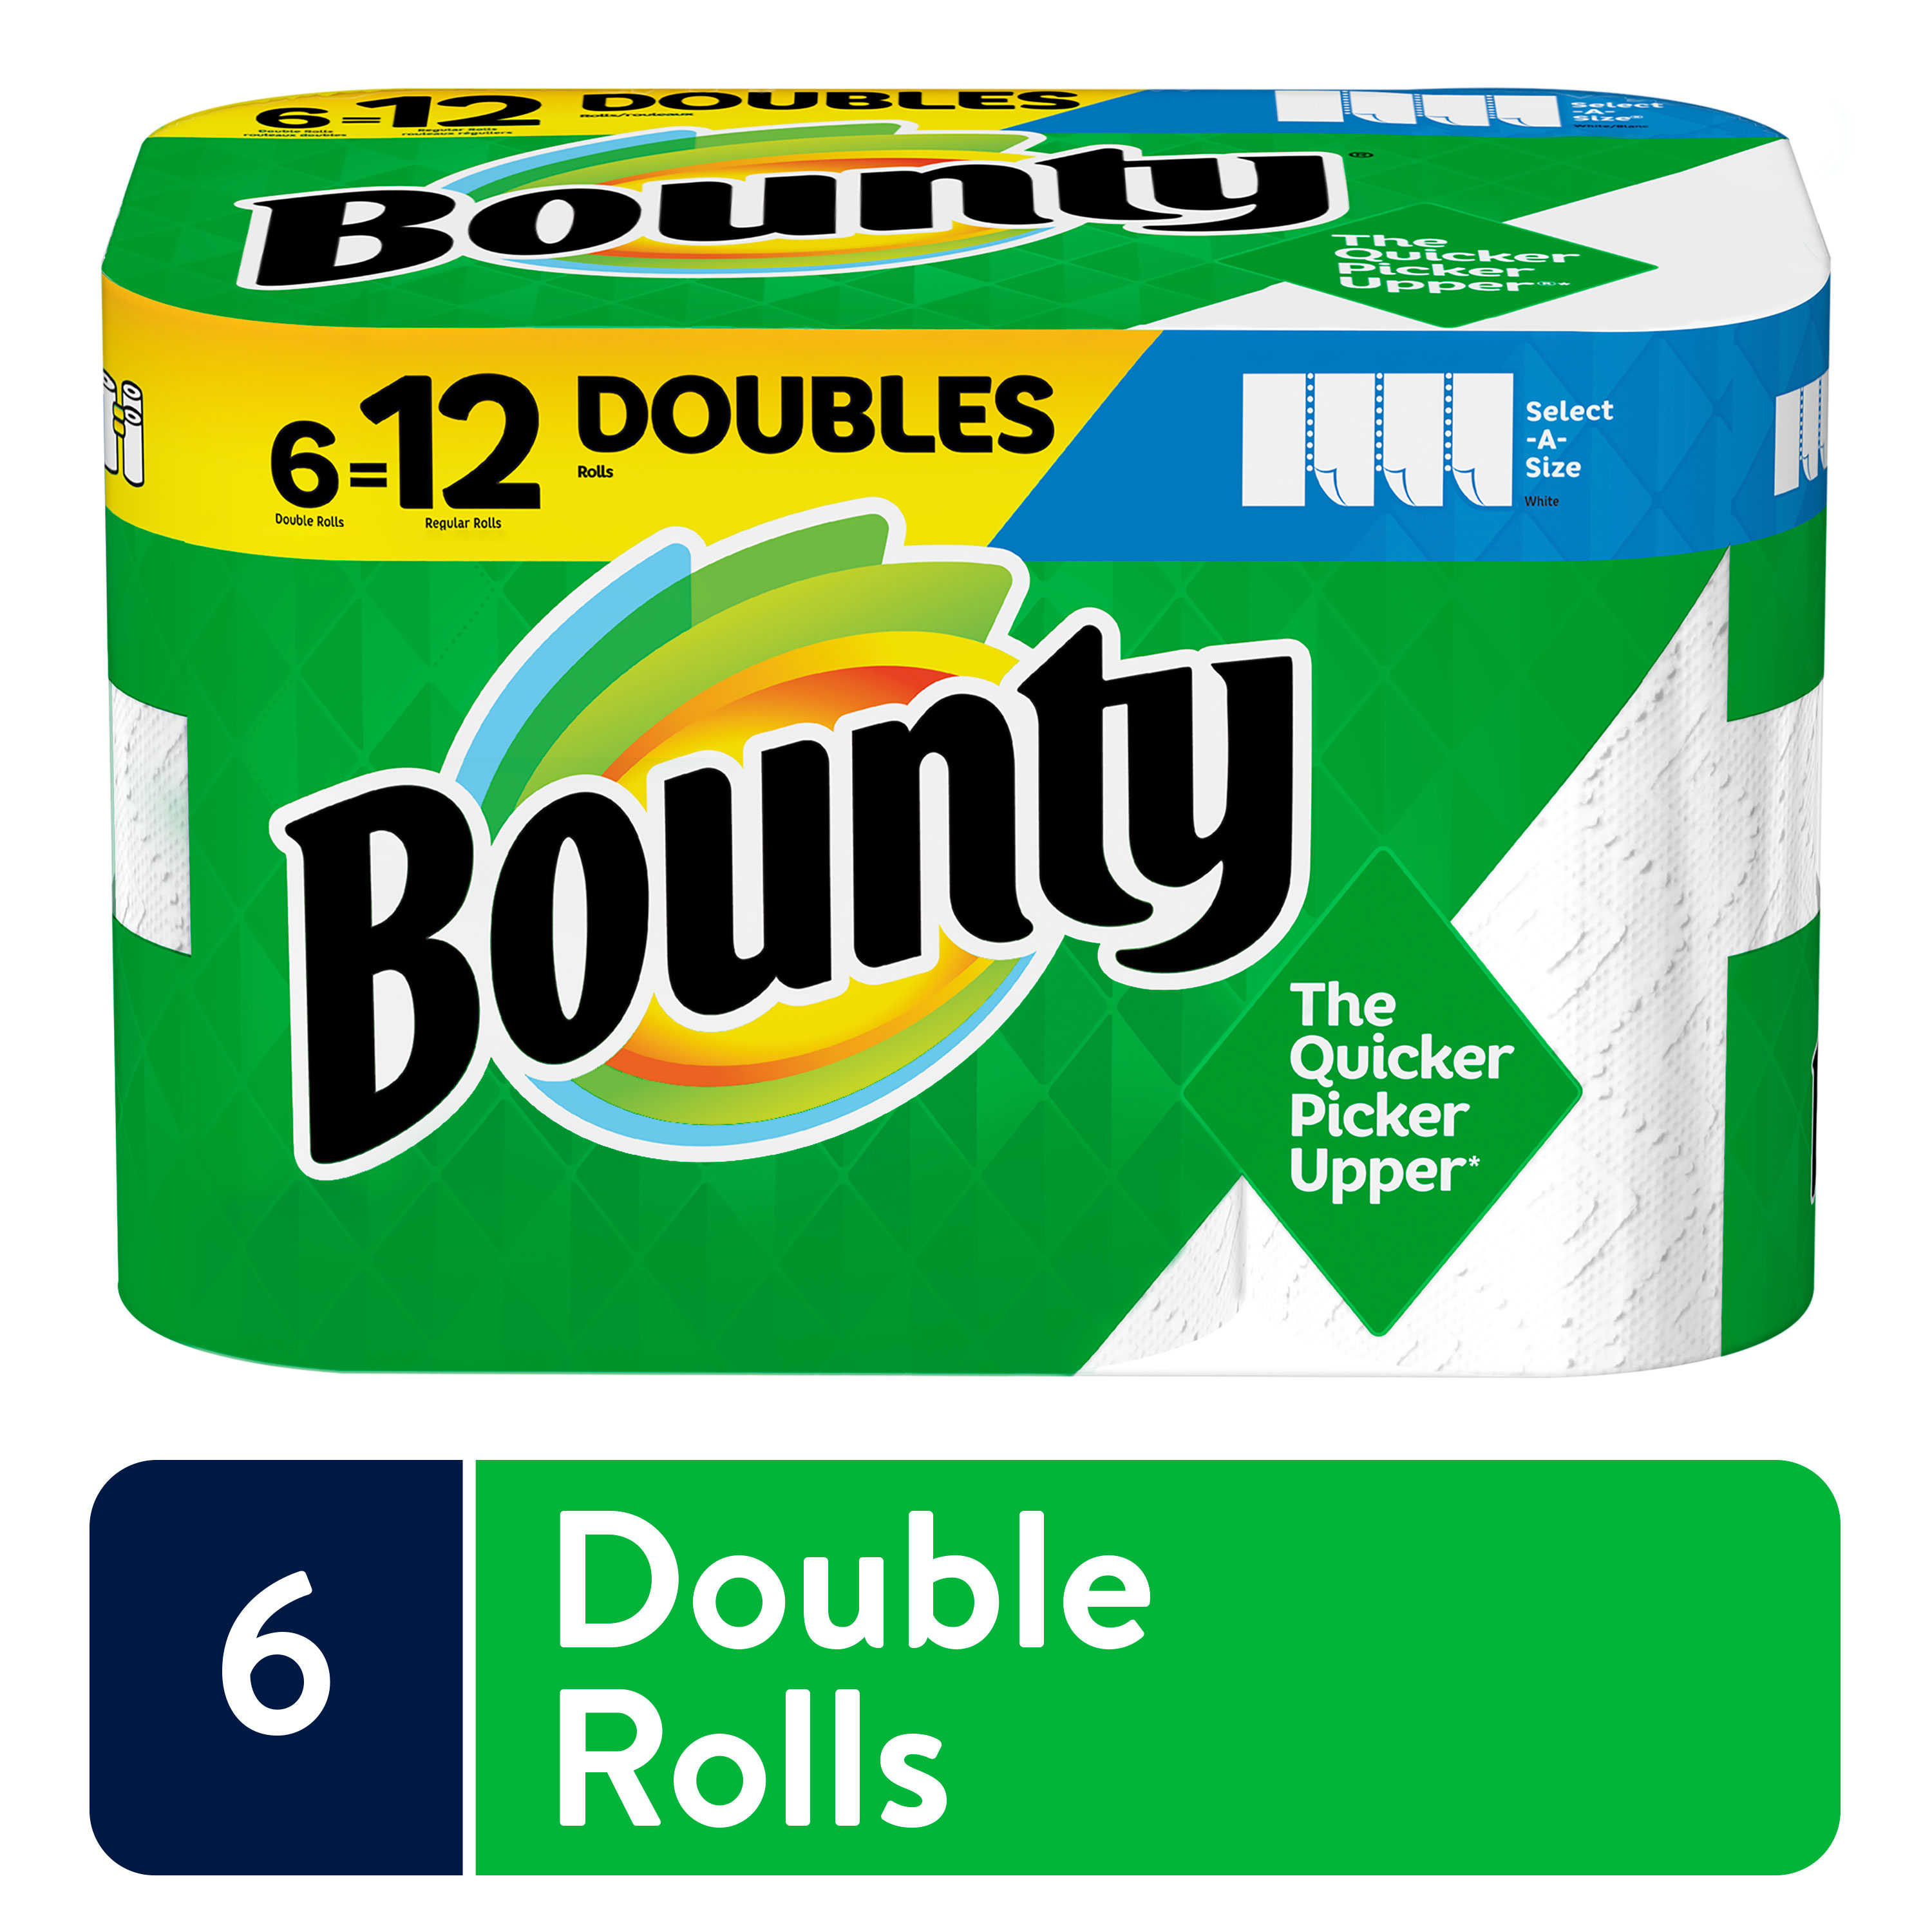 Bounty Select-A-Size Paper Towels, White, Big Rolls, 6 Count of 74 Sheets  Per Roll, 6 Count (Pack of 1)